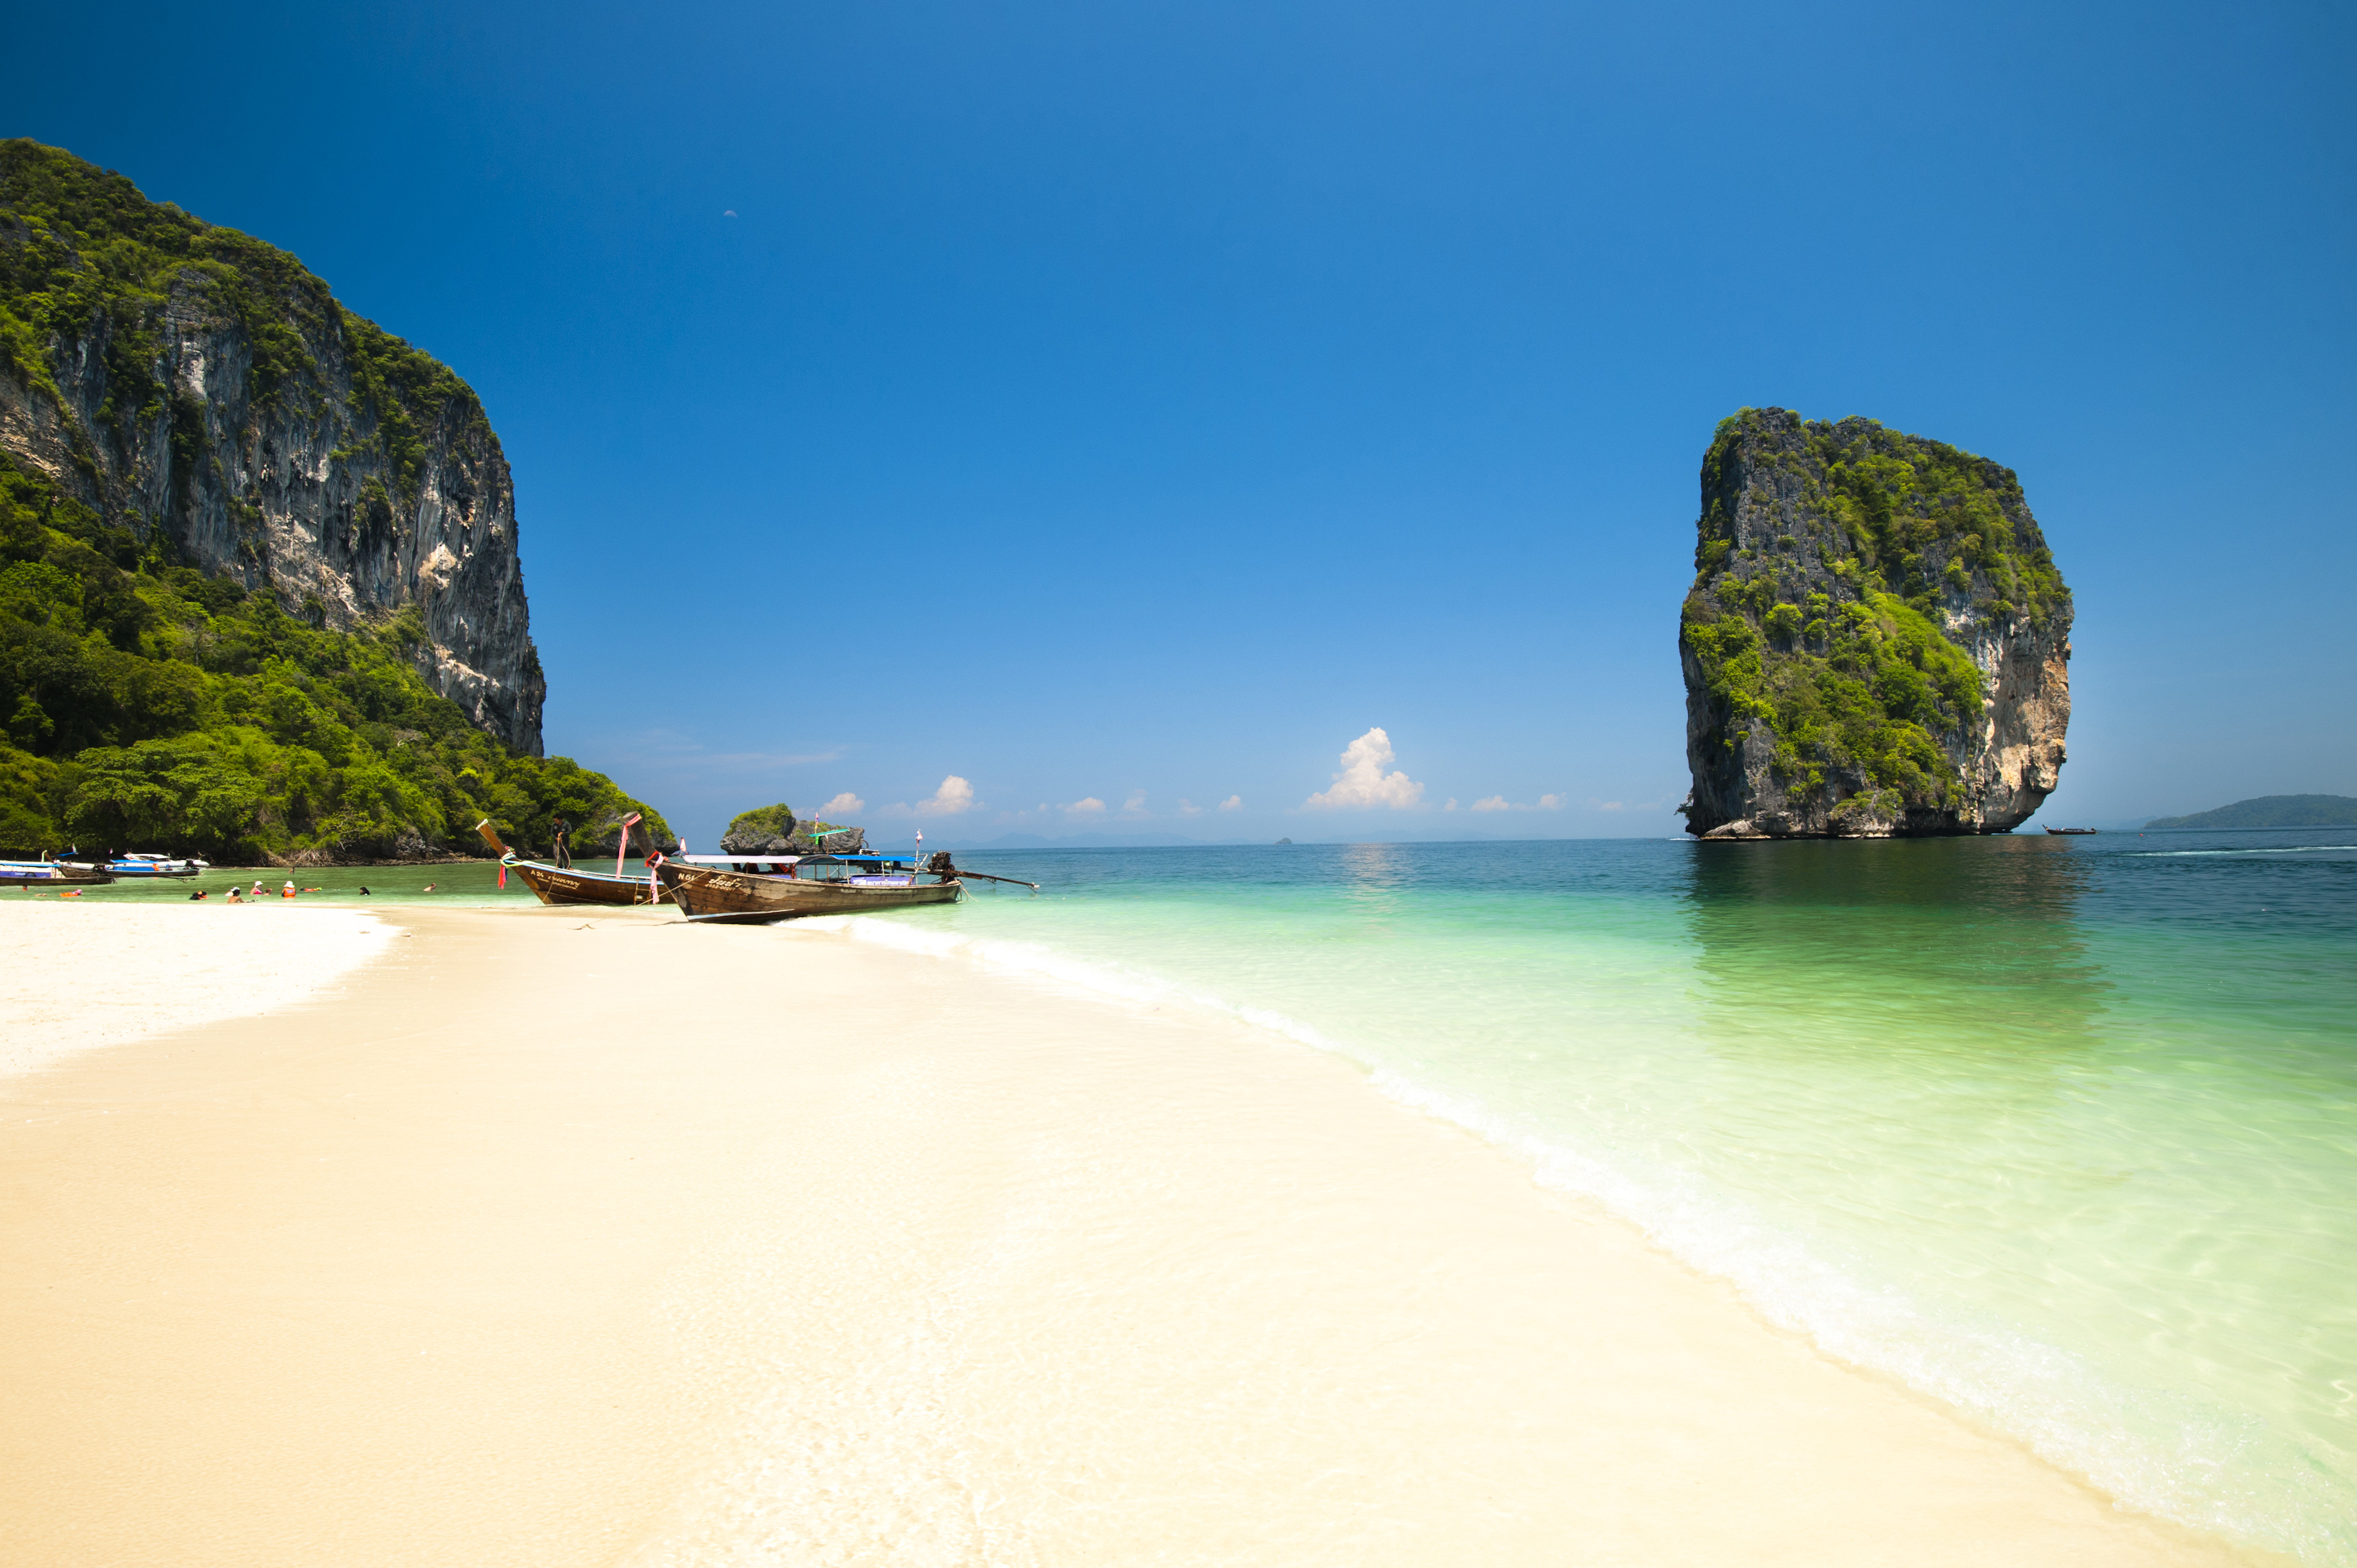 Krabi: 6 Most Incredible Areas to Stay